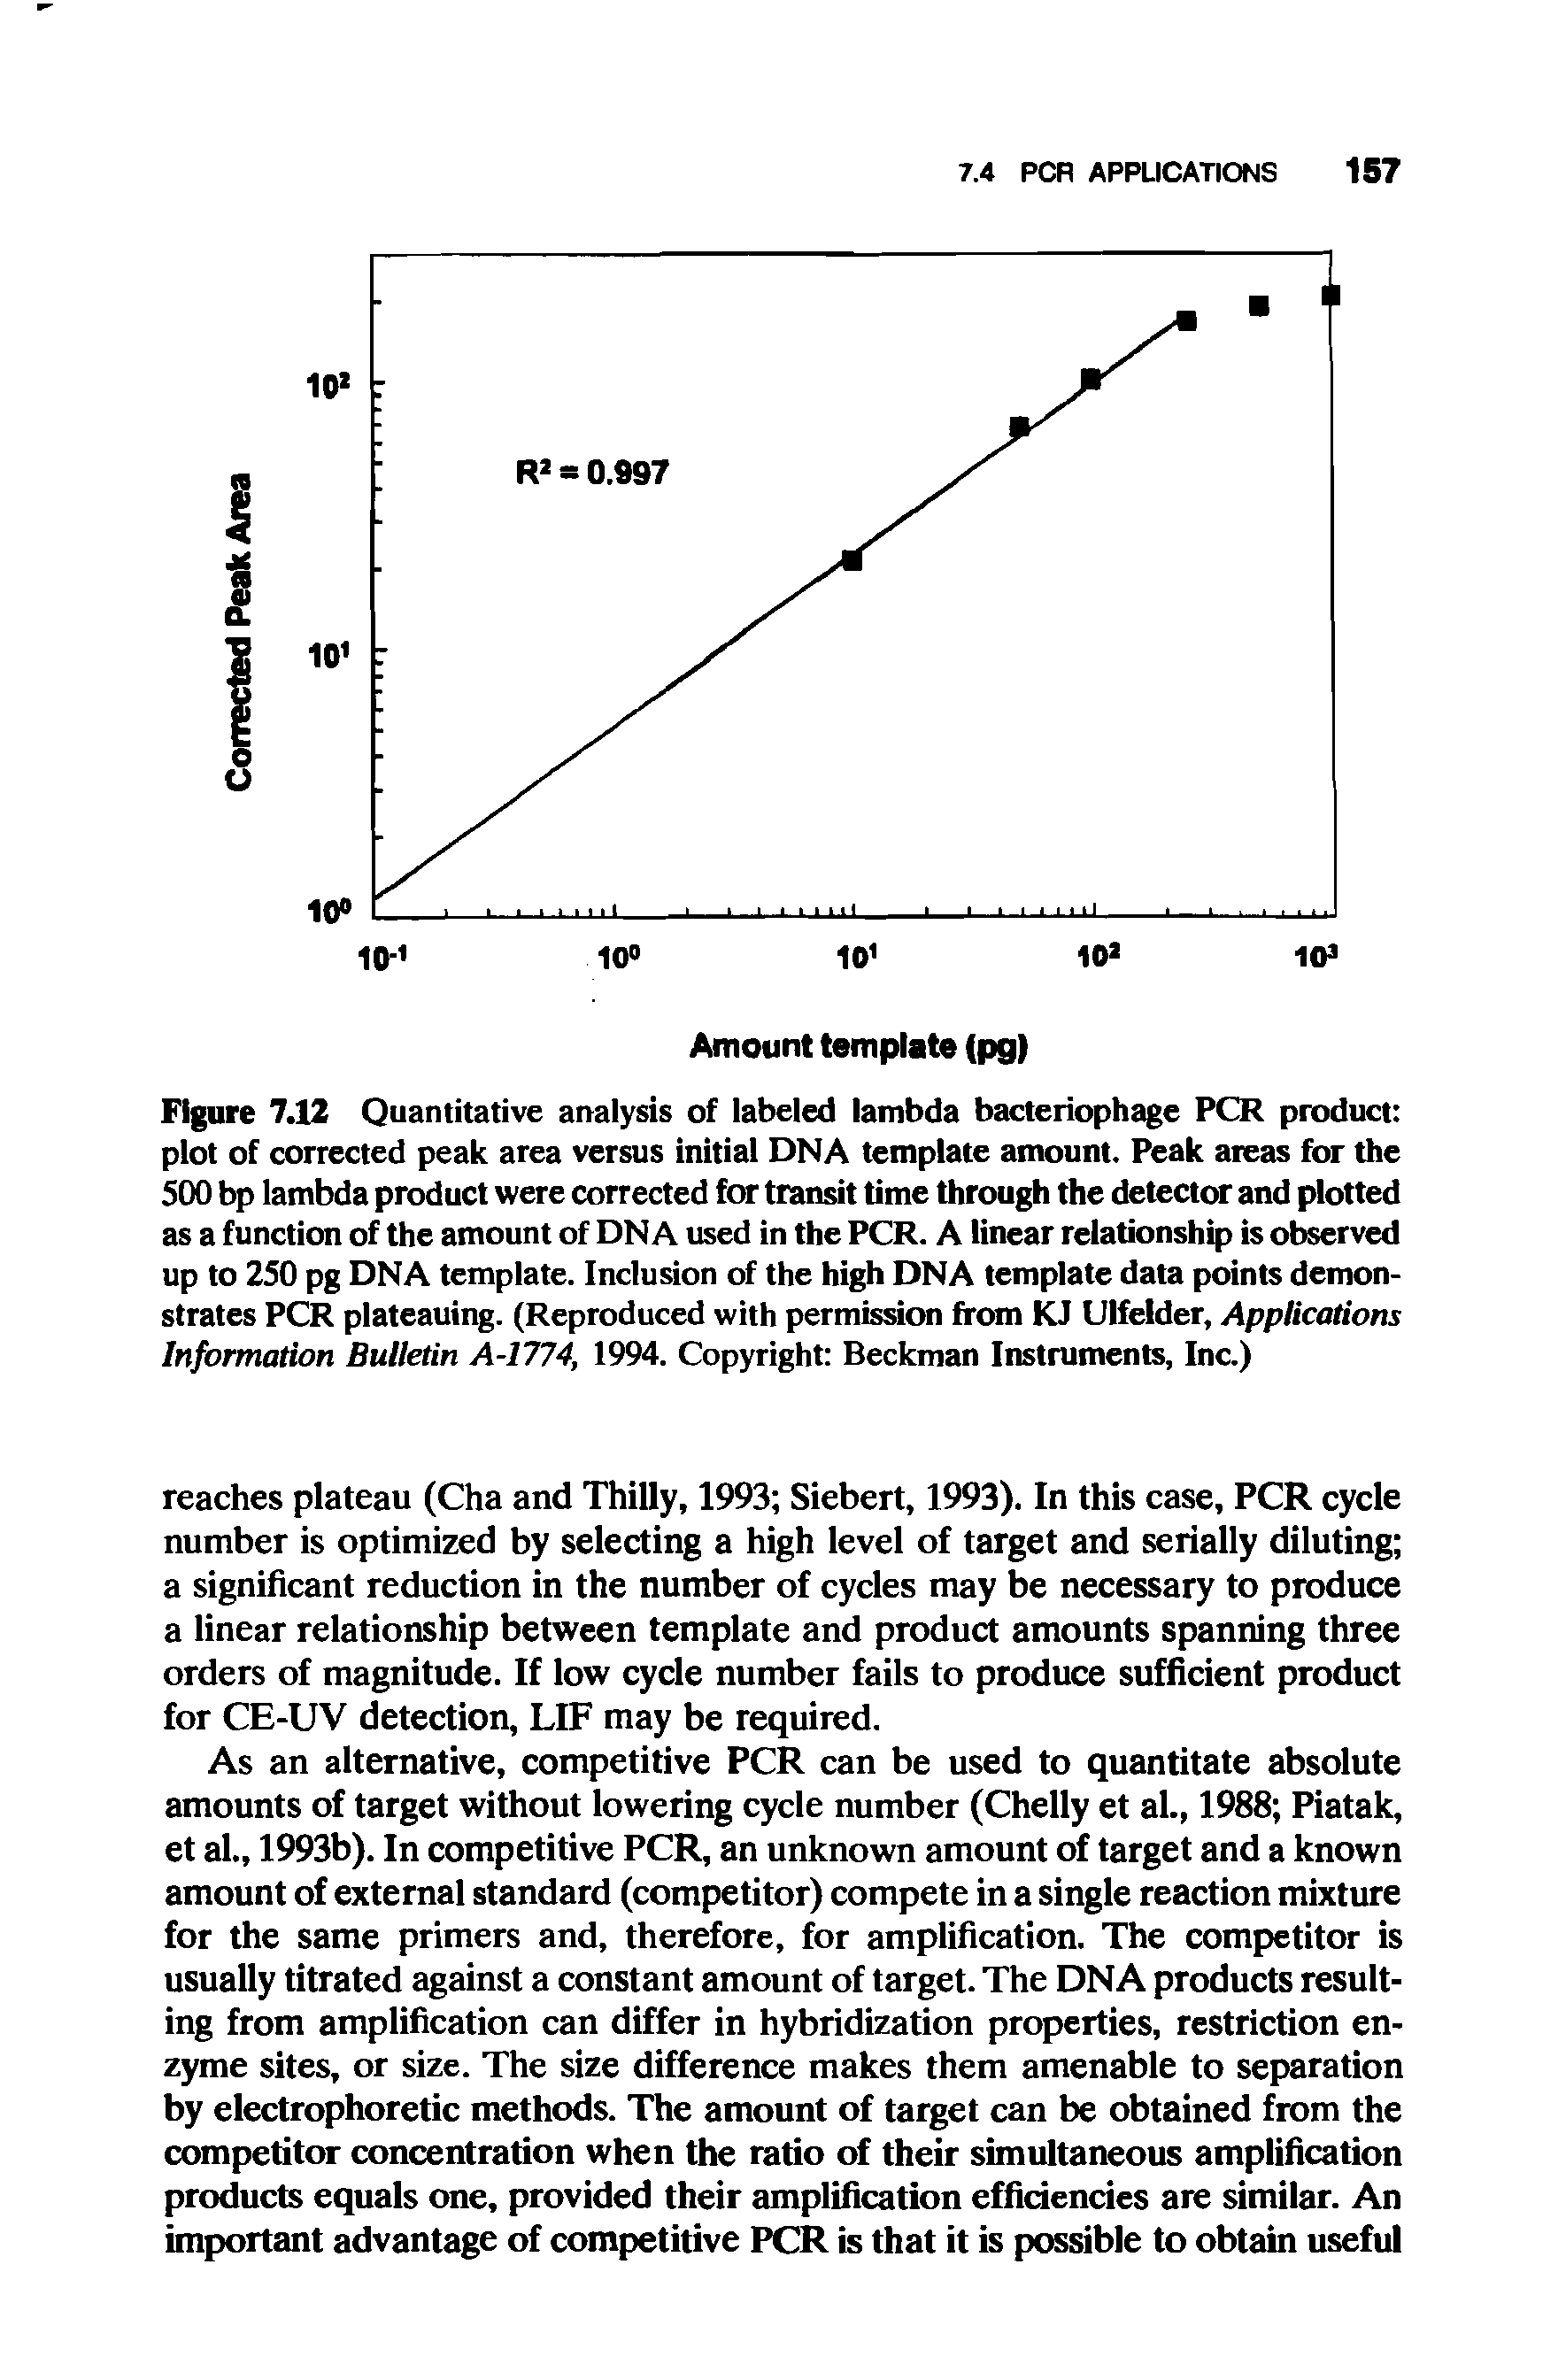 Figure 7.12 Quantitative analysis of labeled lambda bacteriophage PCR product plot of corrected peak area versus initial DNA template amount. Peak areas for the 500 bp lambda product were corrected for transit time through the detector and plotted as a function of the amount of DNA used in the PCR. A linear relationship is observed up to 250 pg DNA template. Inclusion of the high DNA template data points demonstrates PCR plateauing. (Reproduced with permission from KJ Ulfelder, Applications Information Bulletin A-1774, 1994. Copyright Beckman Instruments, Inc.)...